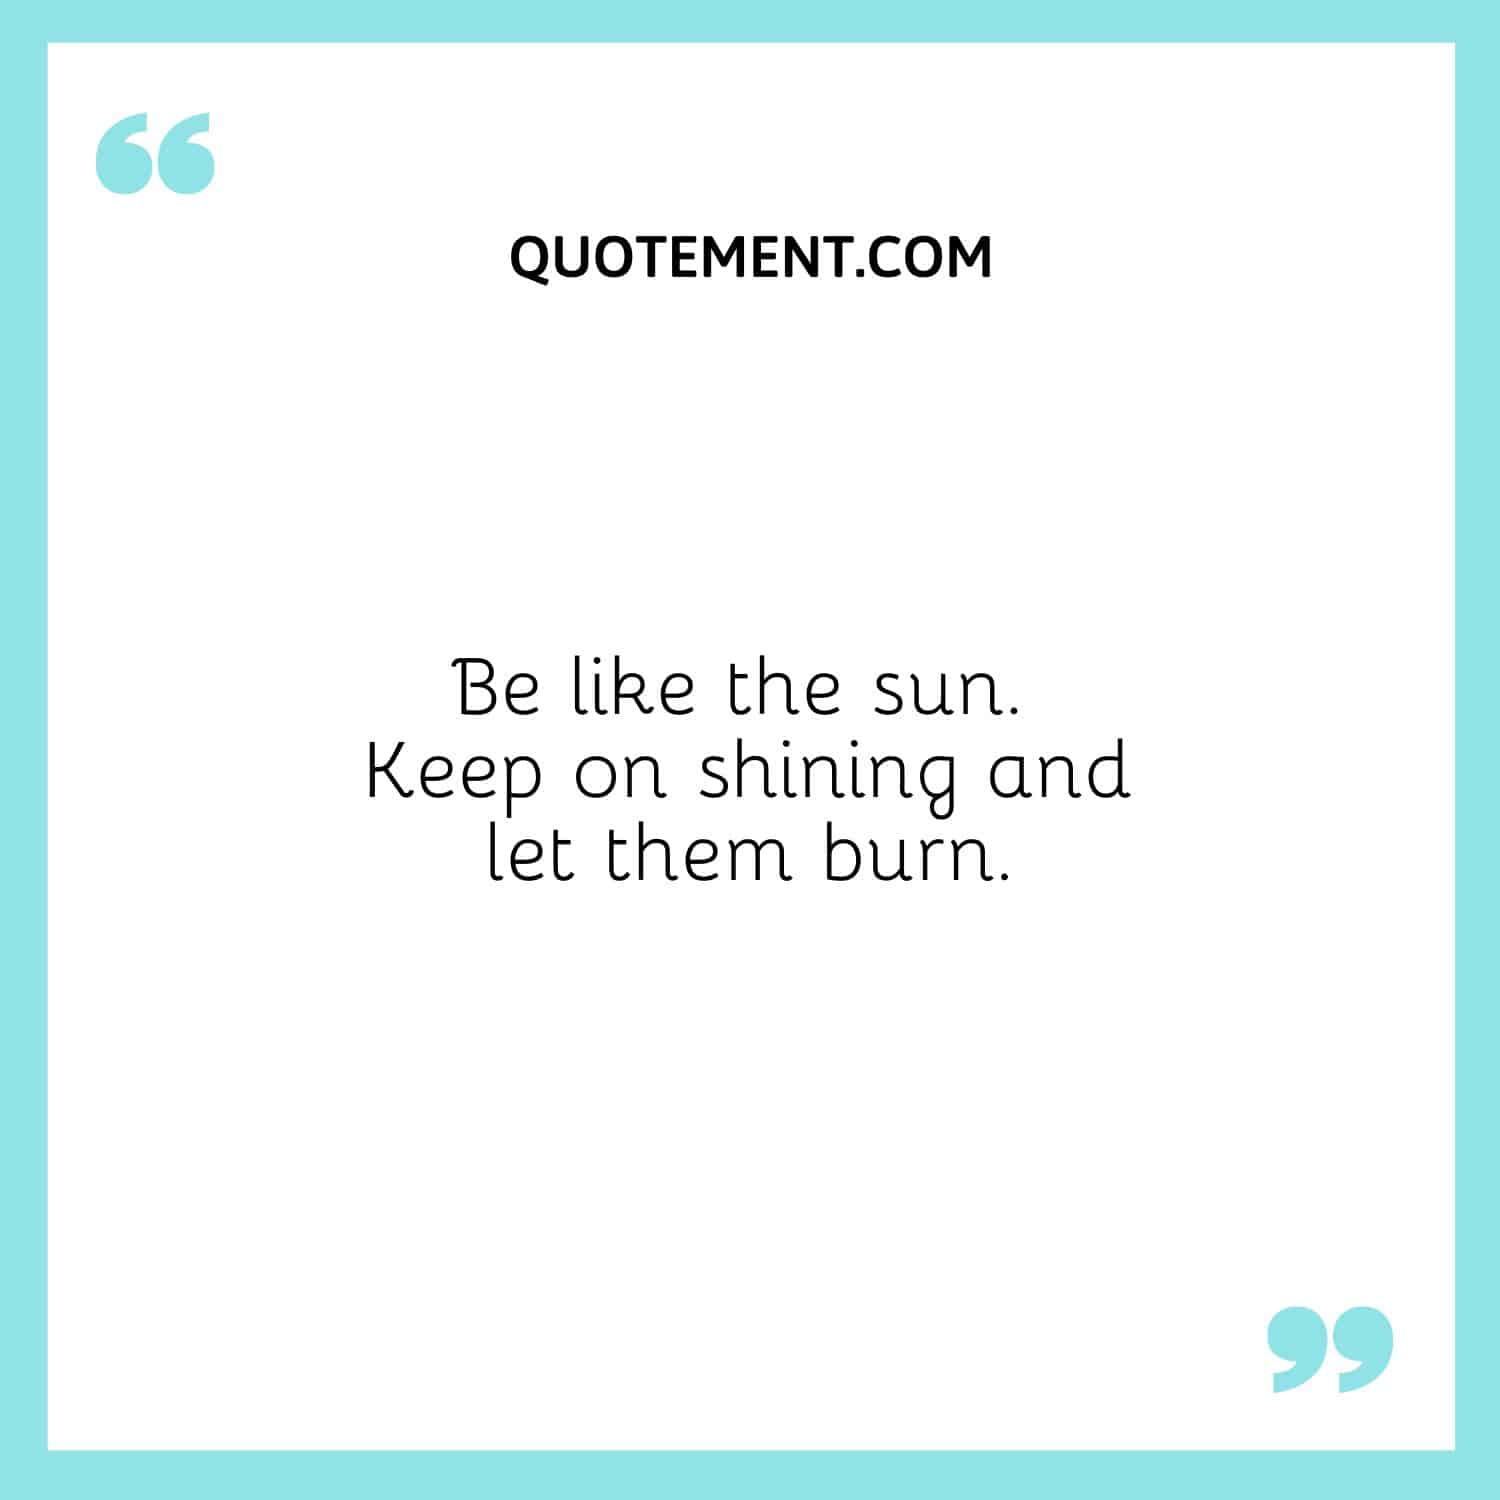 Be like the sun. Keep on shining and let them burn.